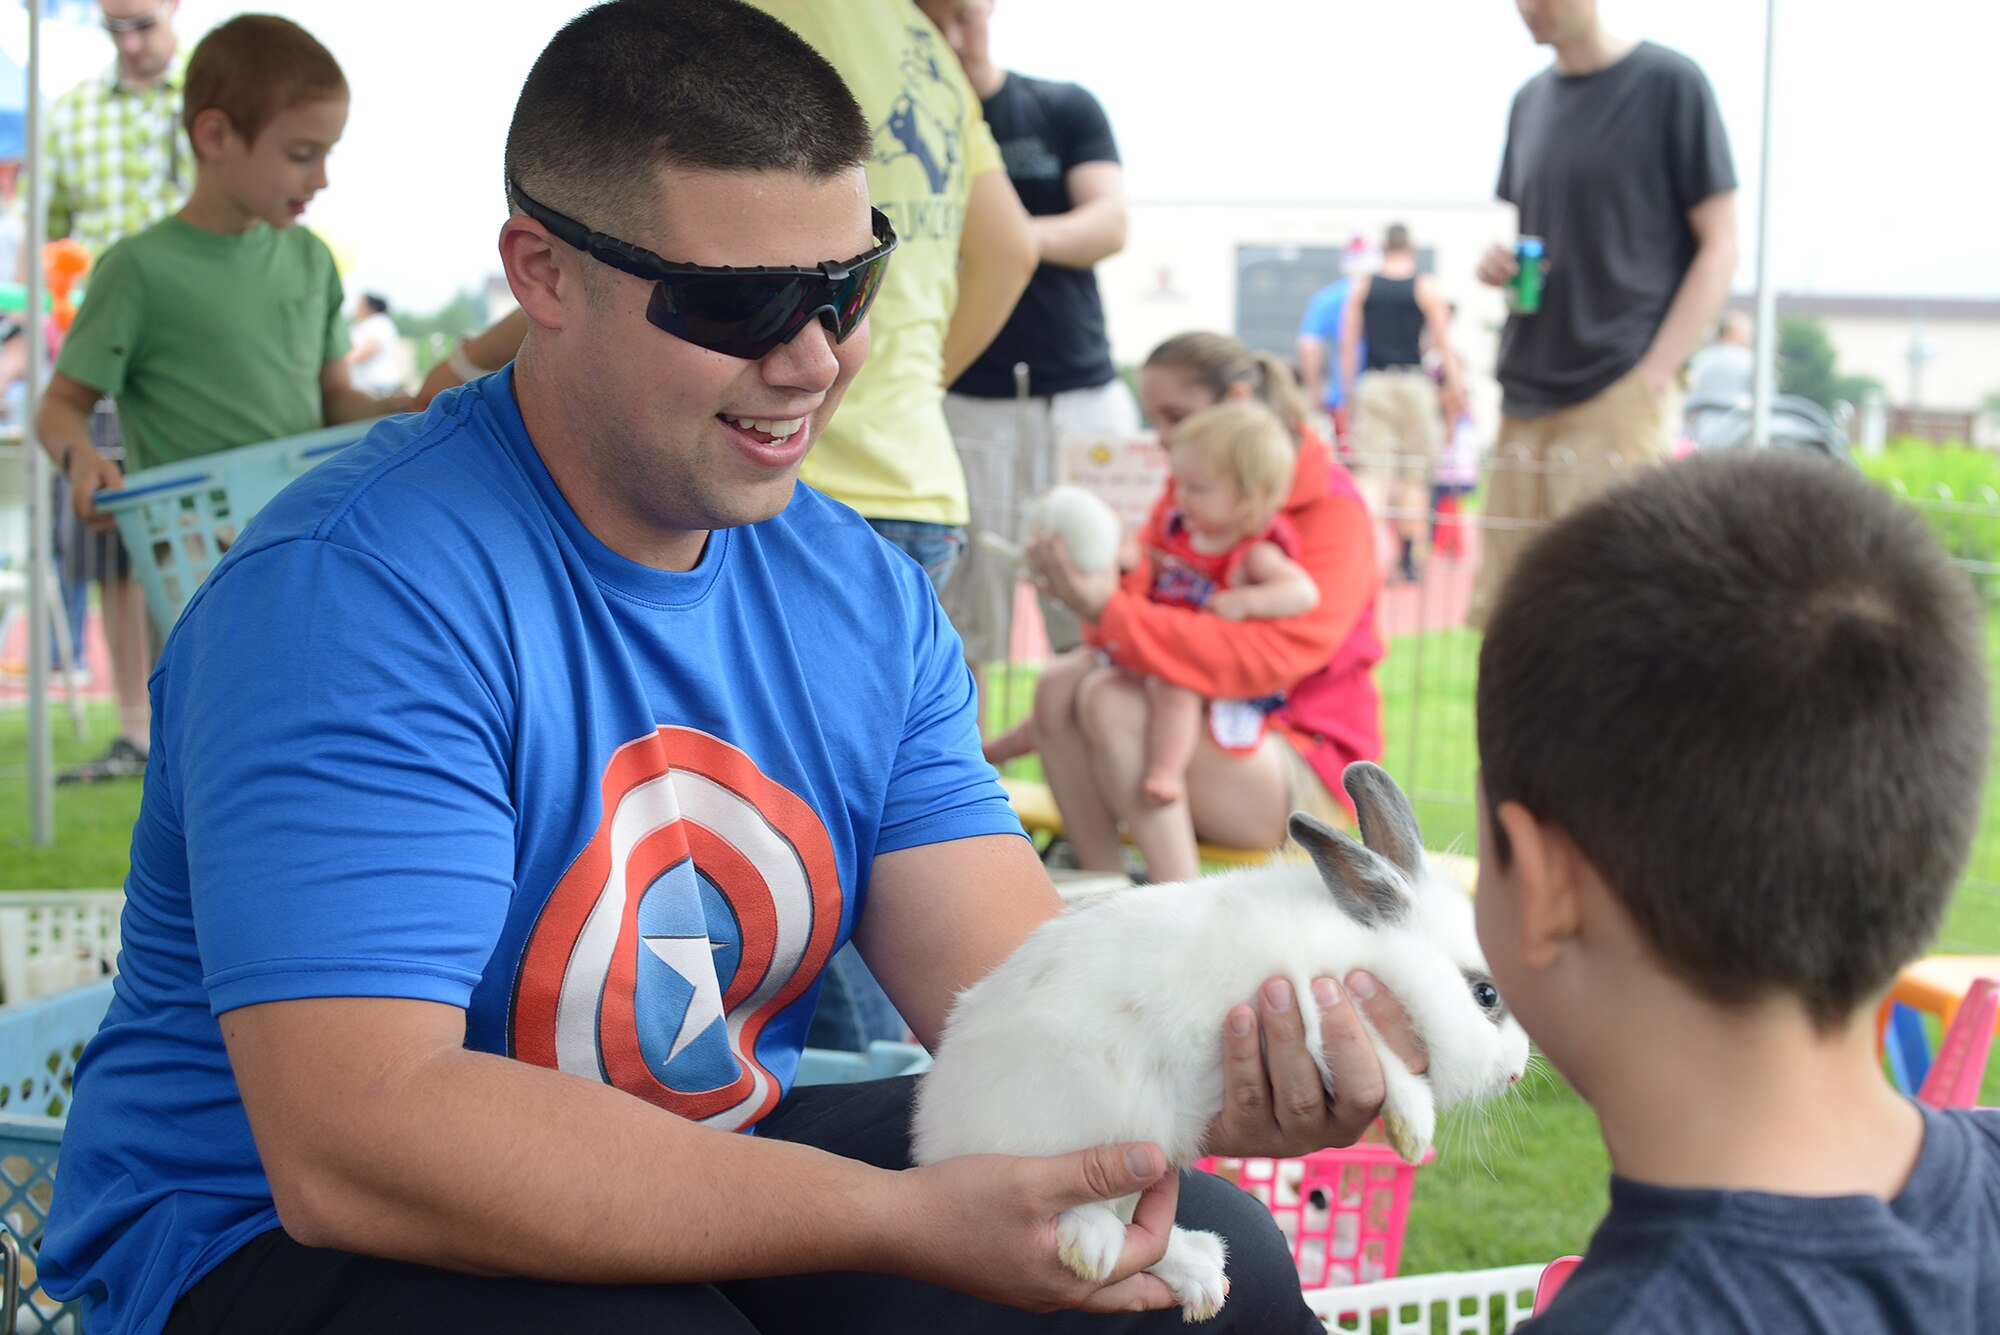 A team Yokota member holds a bunny in a petting zoo during the Celebrate America event at Yokota Air Base, Japan, July 2, 2015. The 374th Force Support Squadron hosted events throughout the day to include a 5k Fun Run, the Leaky Kon Tiki race, go-karts, carnival booths and performances from the Band of the Pacific-Hawaii 'Hana Hou!'. (U.S. Air Force photo by Airman 1st Class David C. Danford/Released)